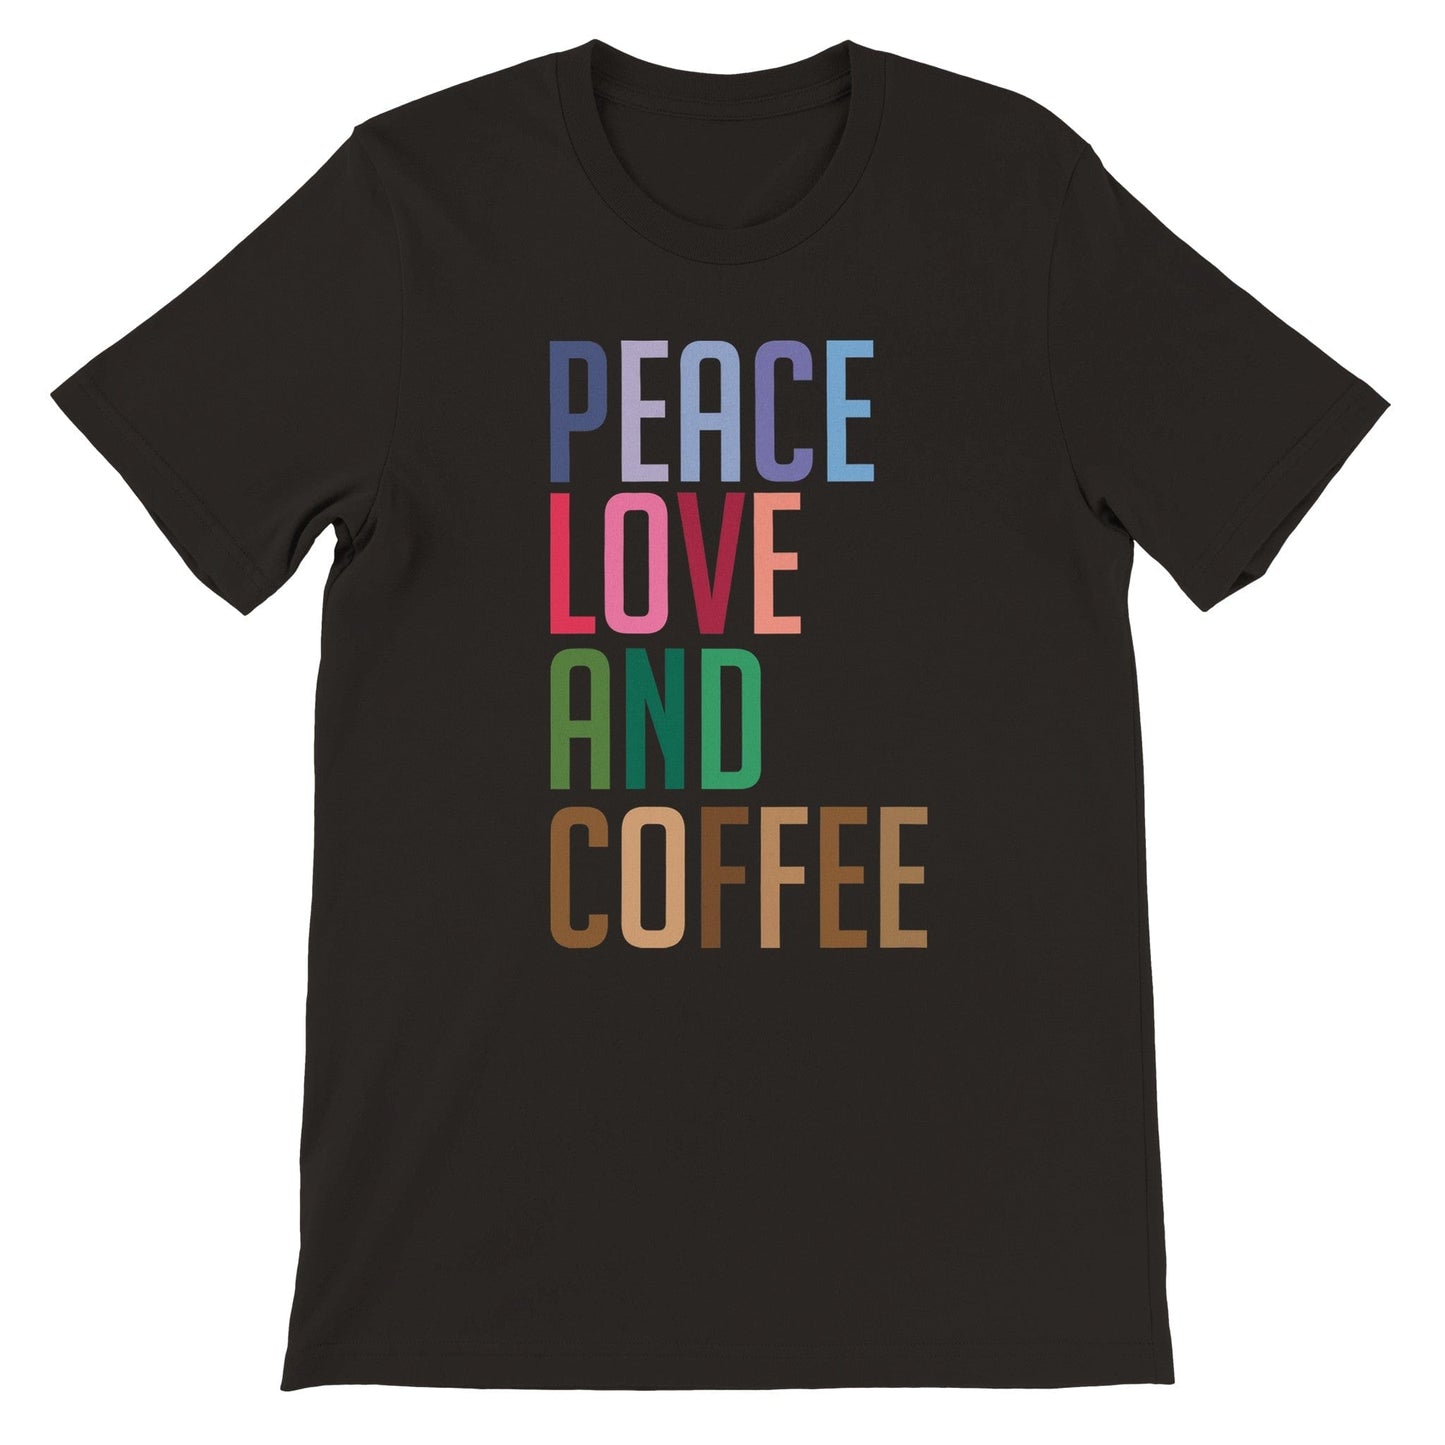 Good Bean Gifts "Peace Love and Coffee" - Unisex Crewneck T-shirt Black / S